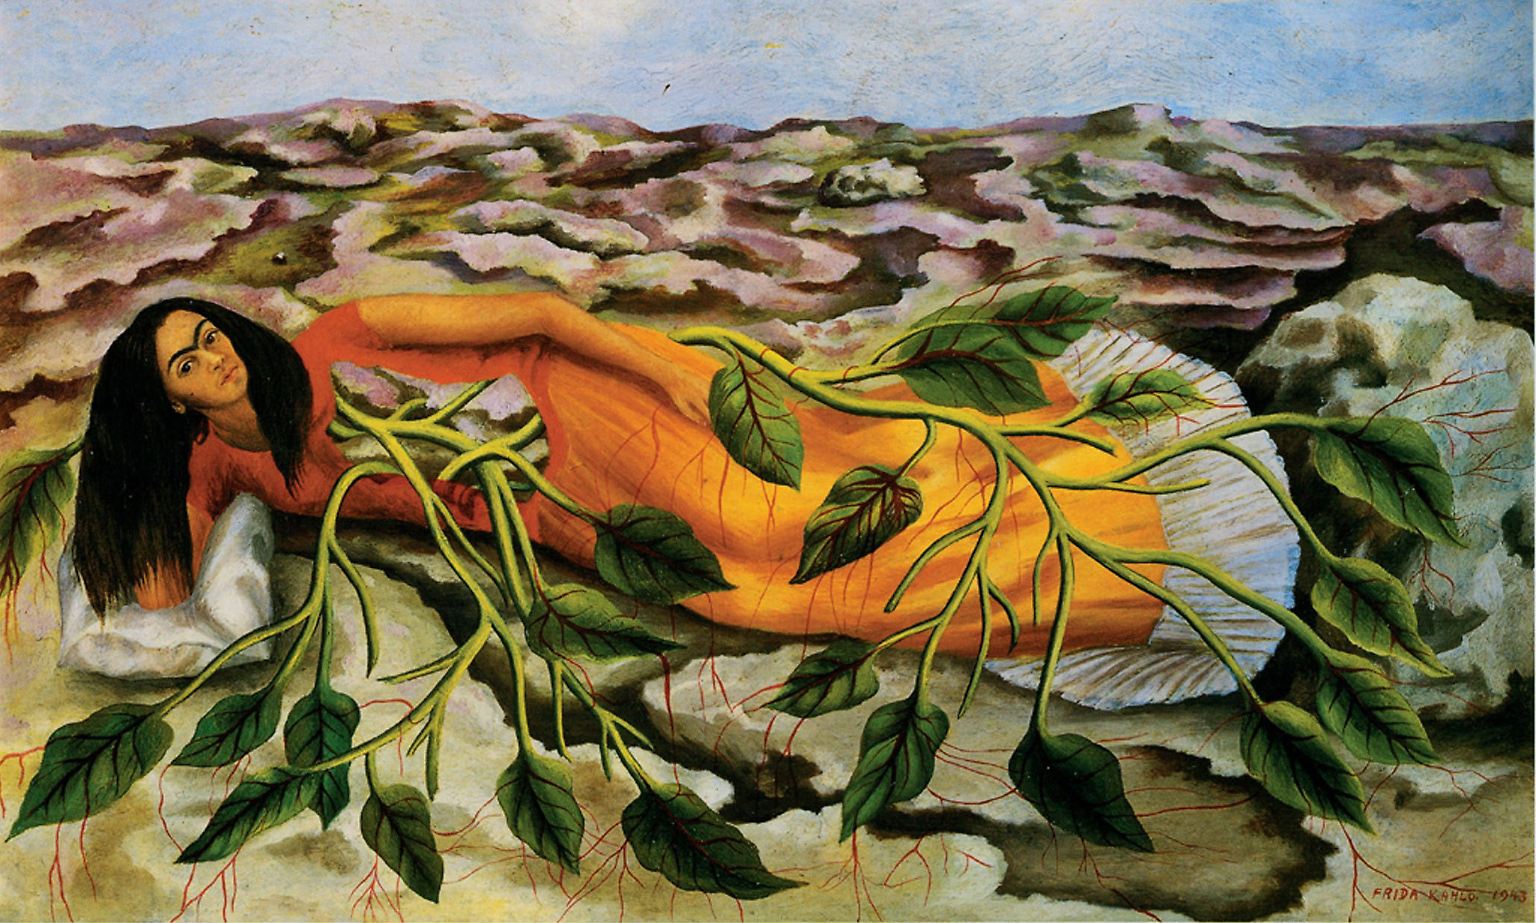 Surrealist painting by Frida Kahlo depicting a female figure on drought-ridden ground, with green leaves growing out of her